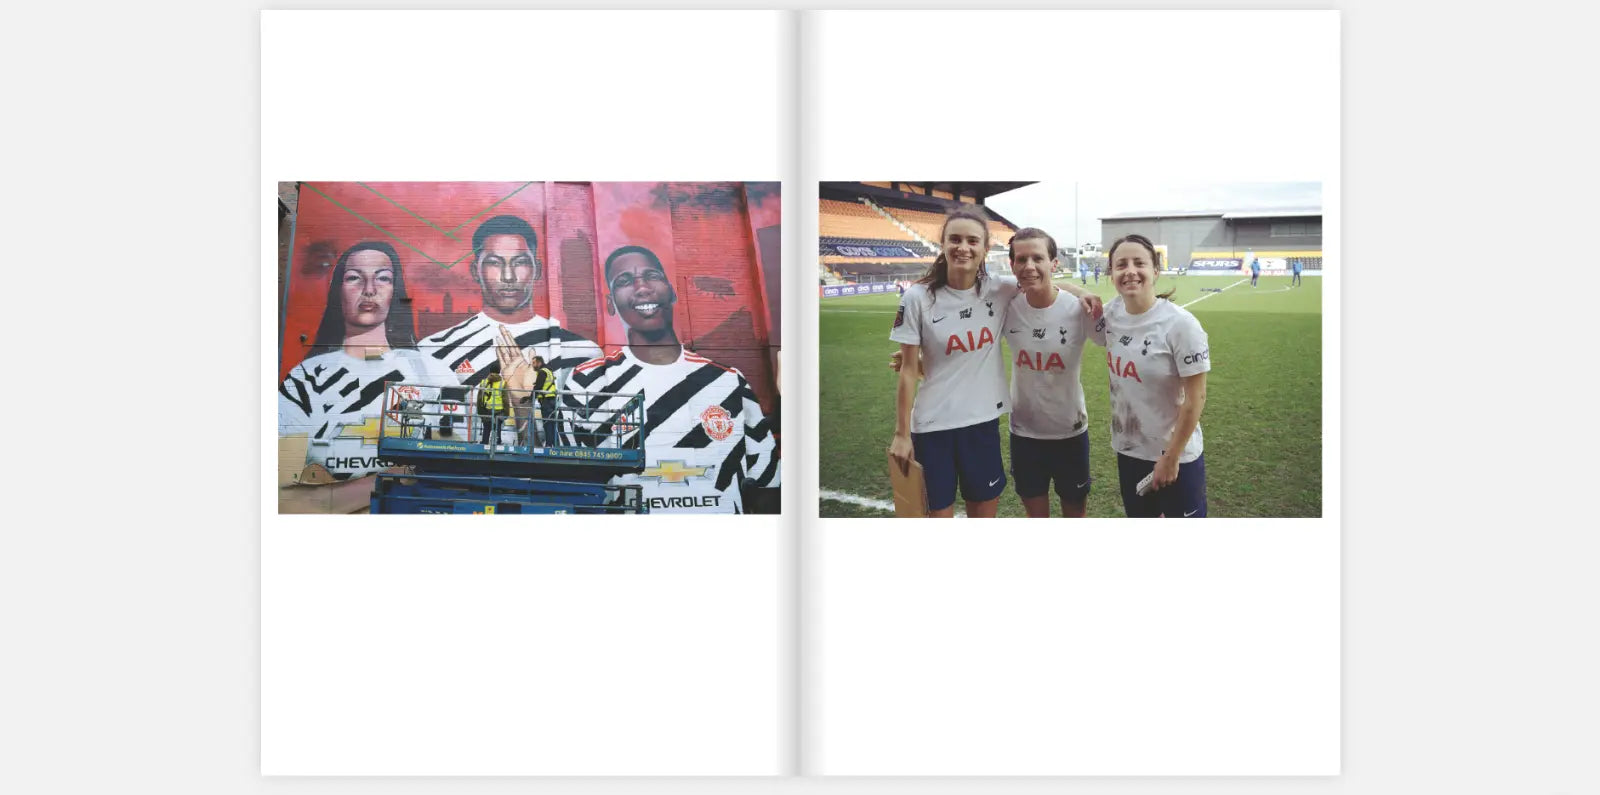 Two-page spread from the zine "The Women's Game" by Claire Wray. The left page shows a mural of three football players in black and white jerseys being painted by two artists on a scissor lift. The right page features three female football players in white "AIA" jerseys, smiling and posing on a football field after a match, with the stadium in the background.